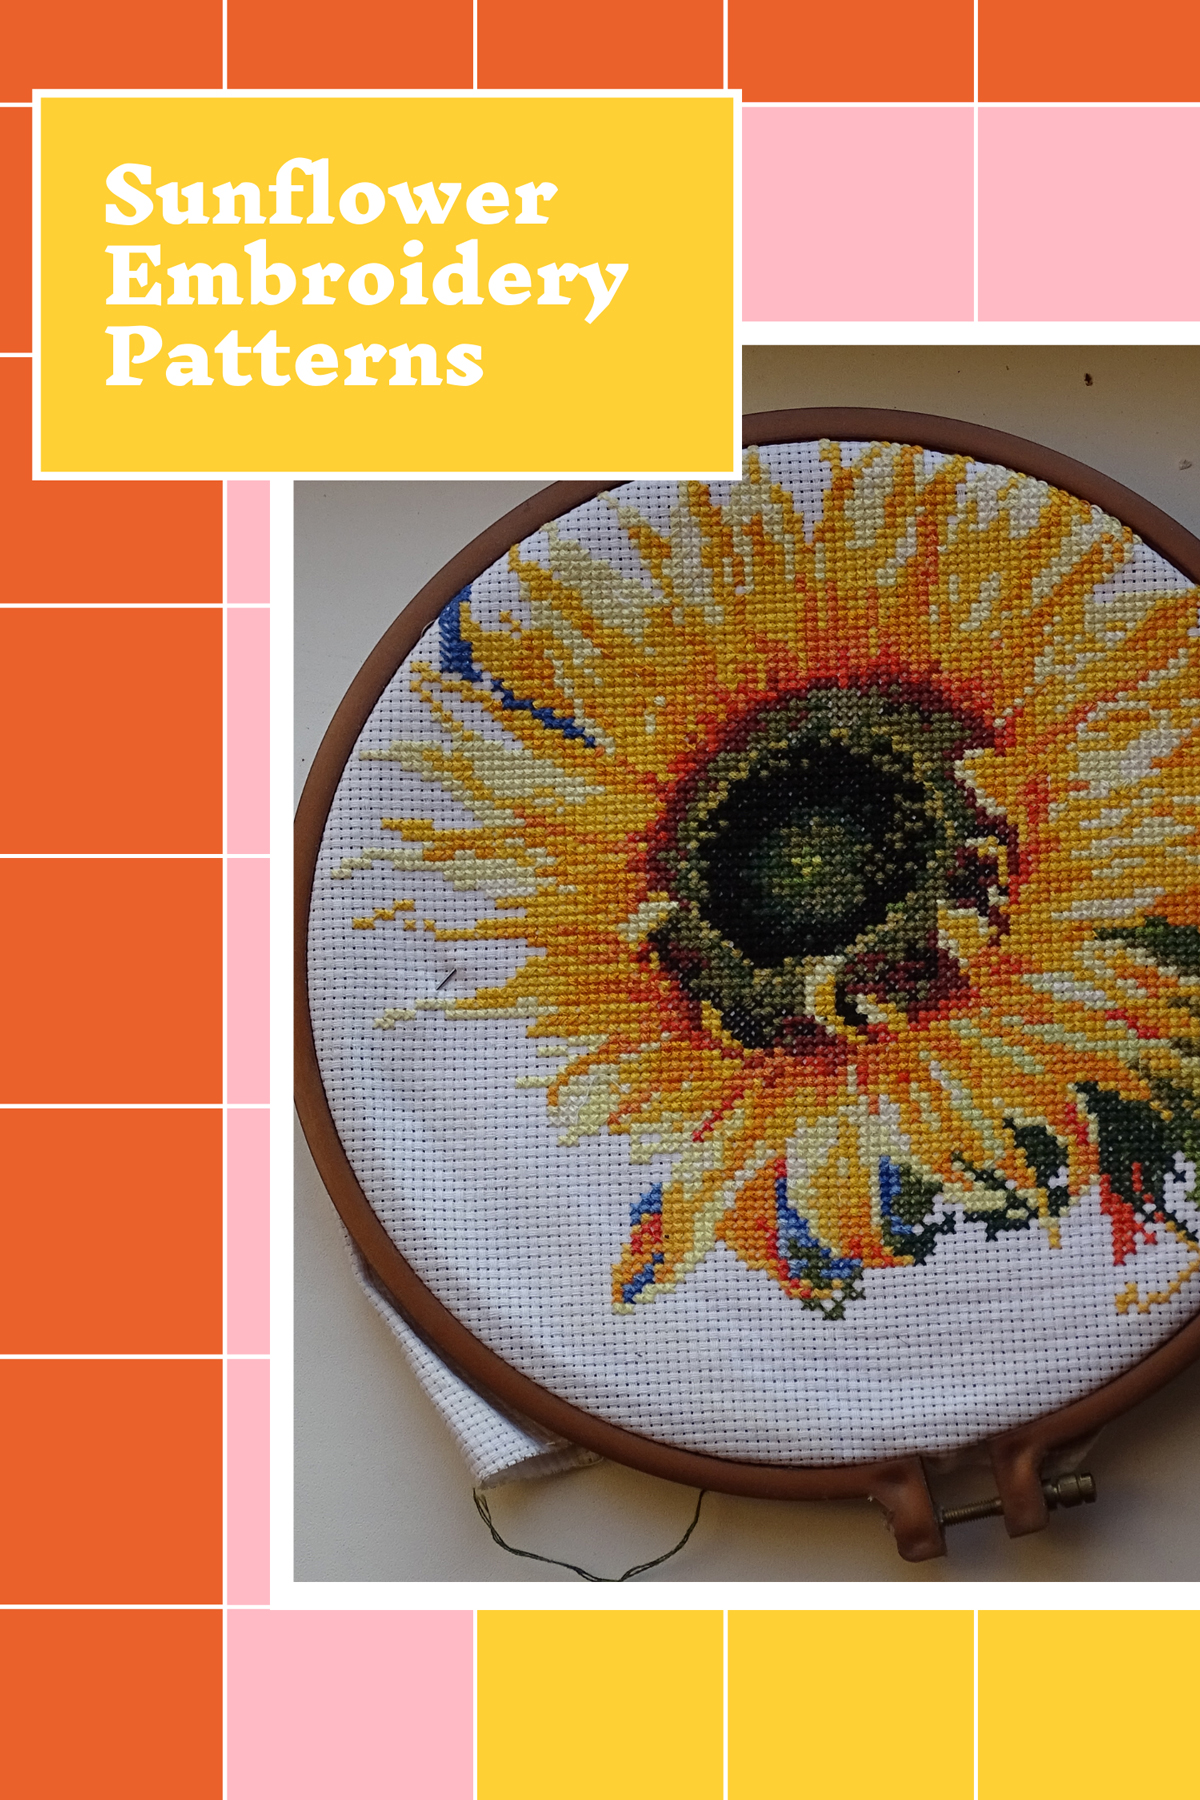 Sunflower Embroidery Patterns